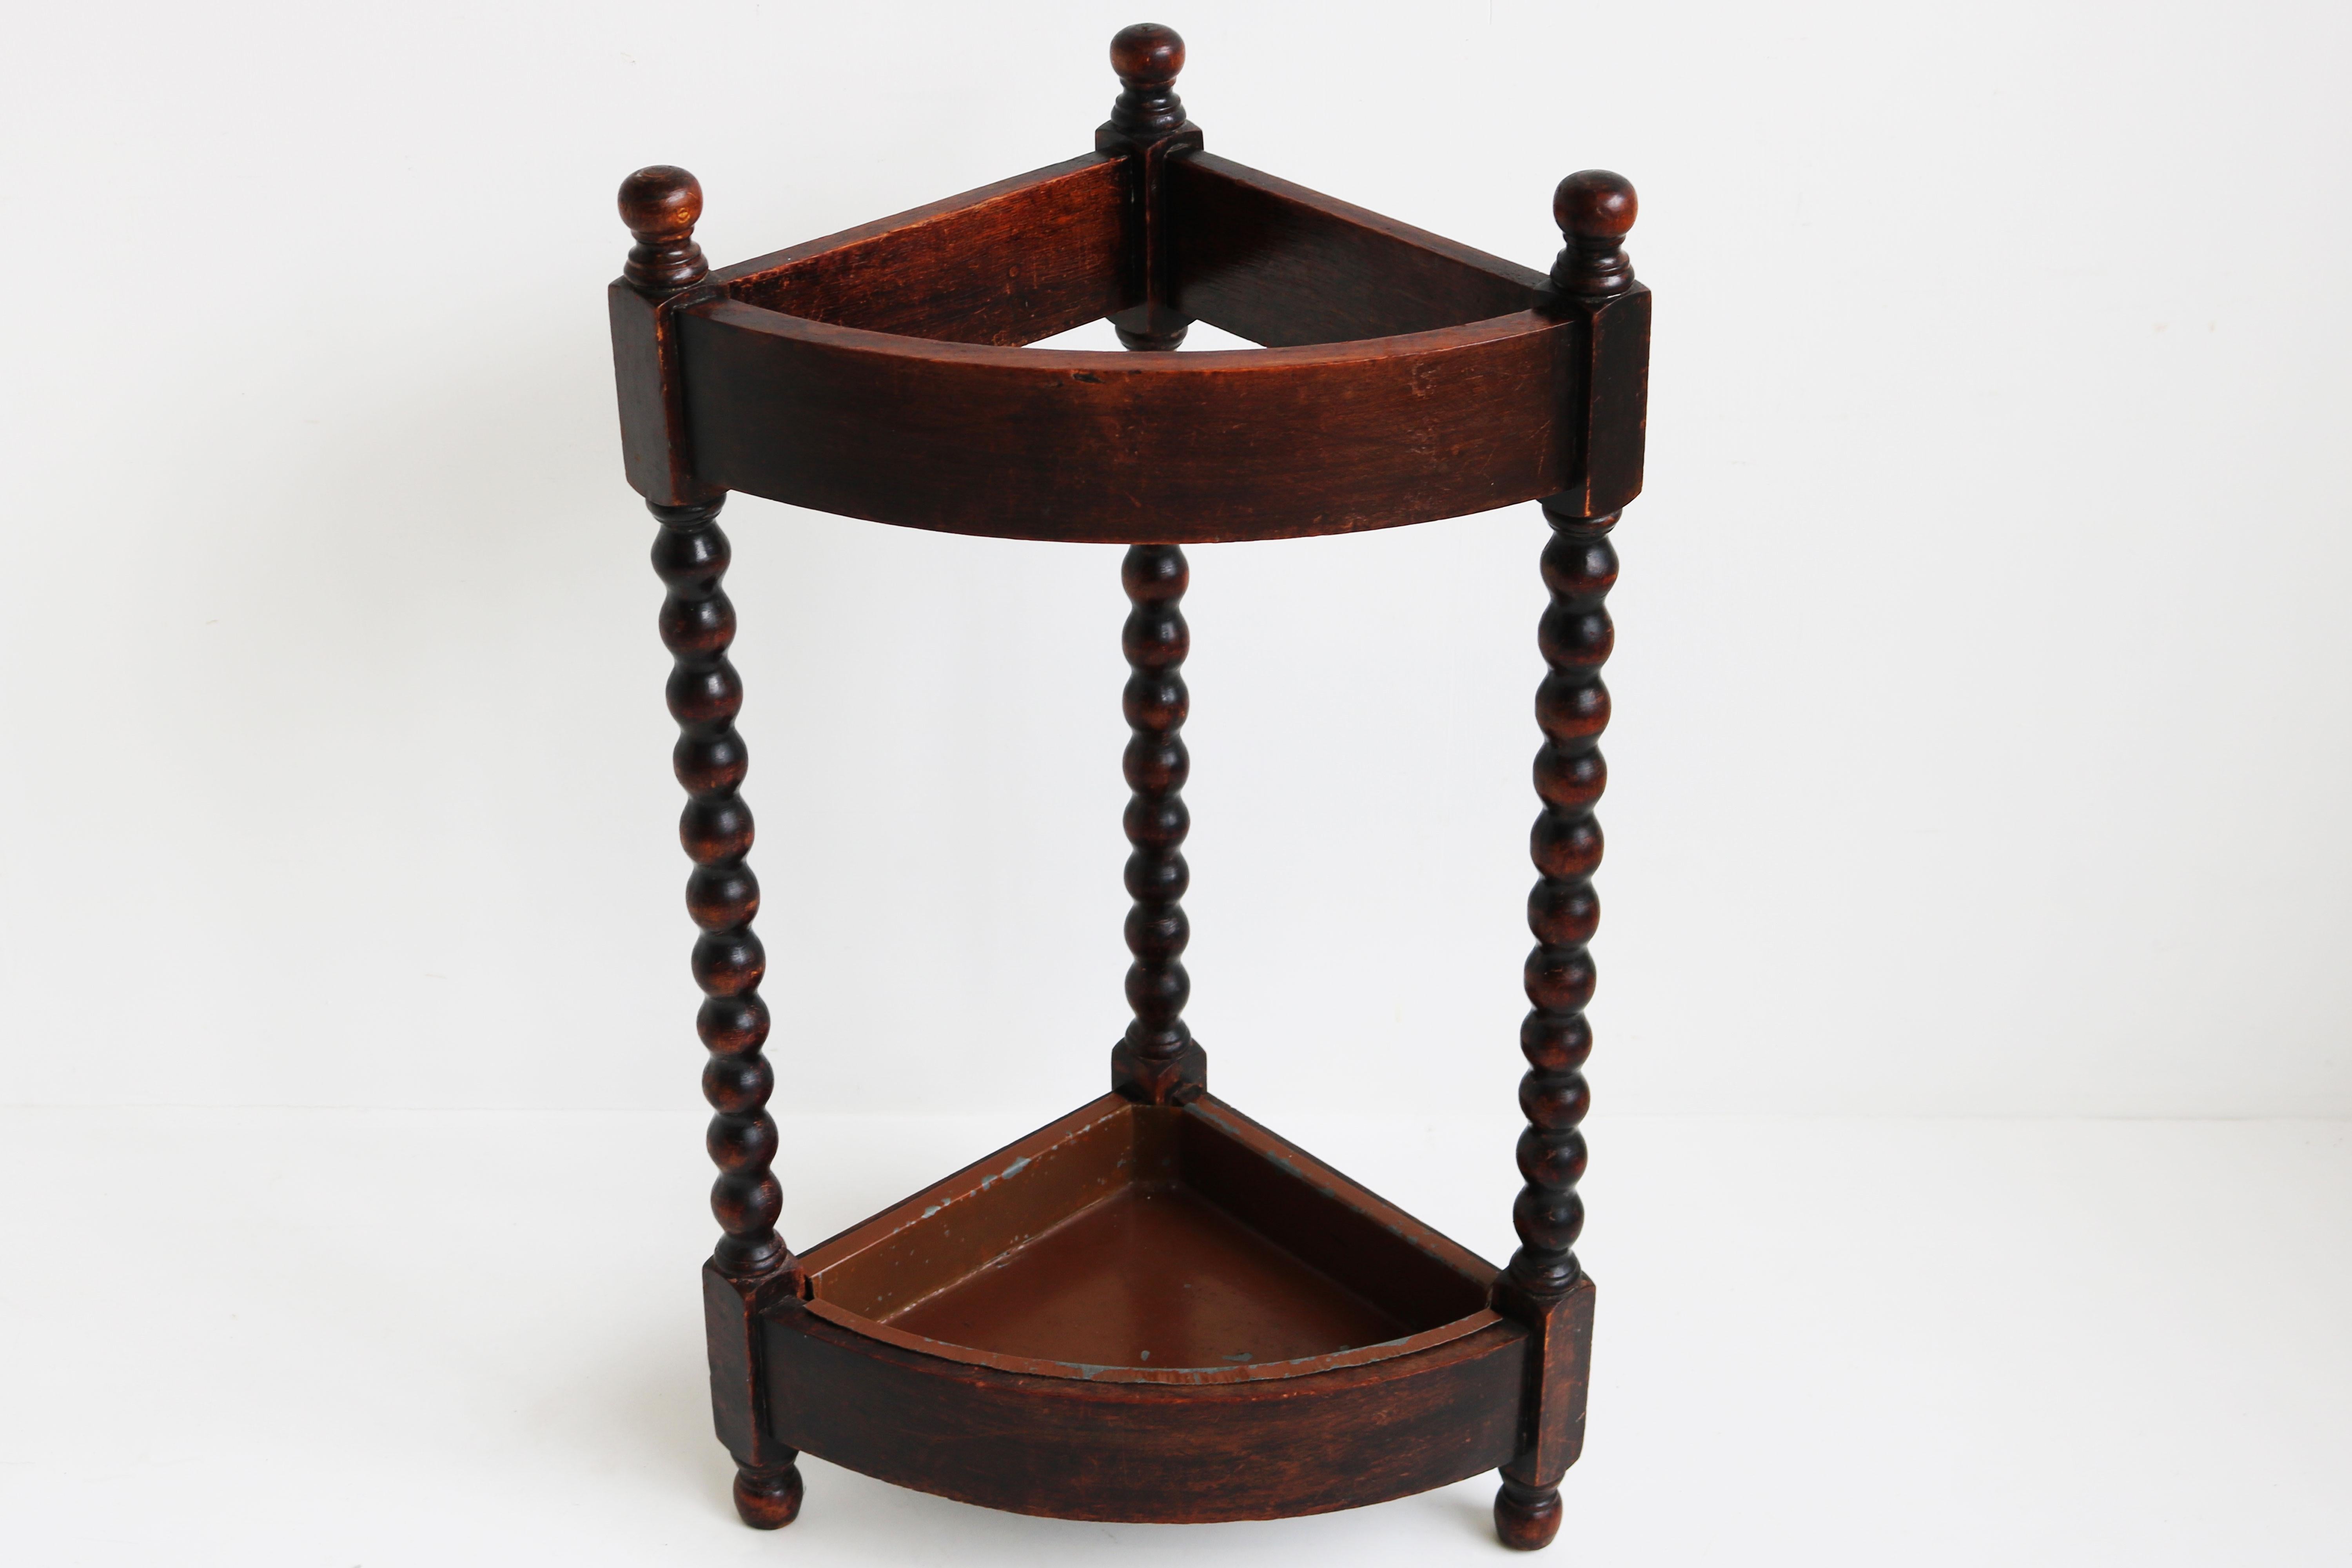 Gorgeous solid oak French Art Deco period umbrella stand / stick holder dated 1930
Decorated with carved balls (very similar to barley twist) can be placed into a corner but looks just as great as a hallway centerpiece.
Very practical and